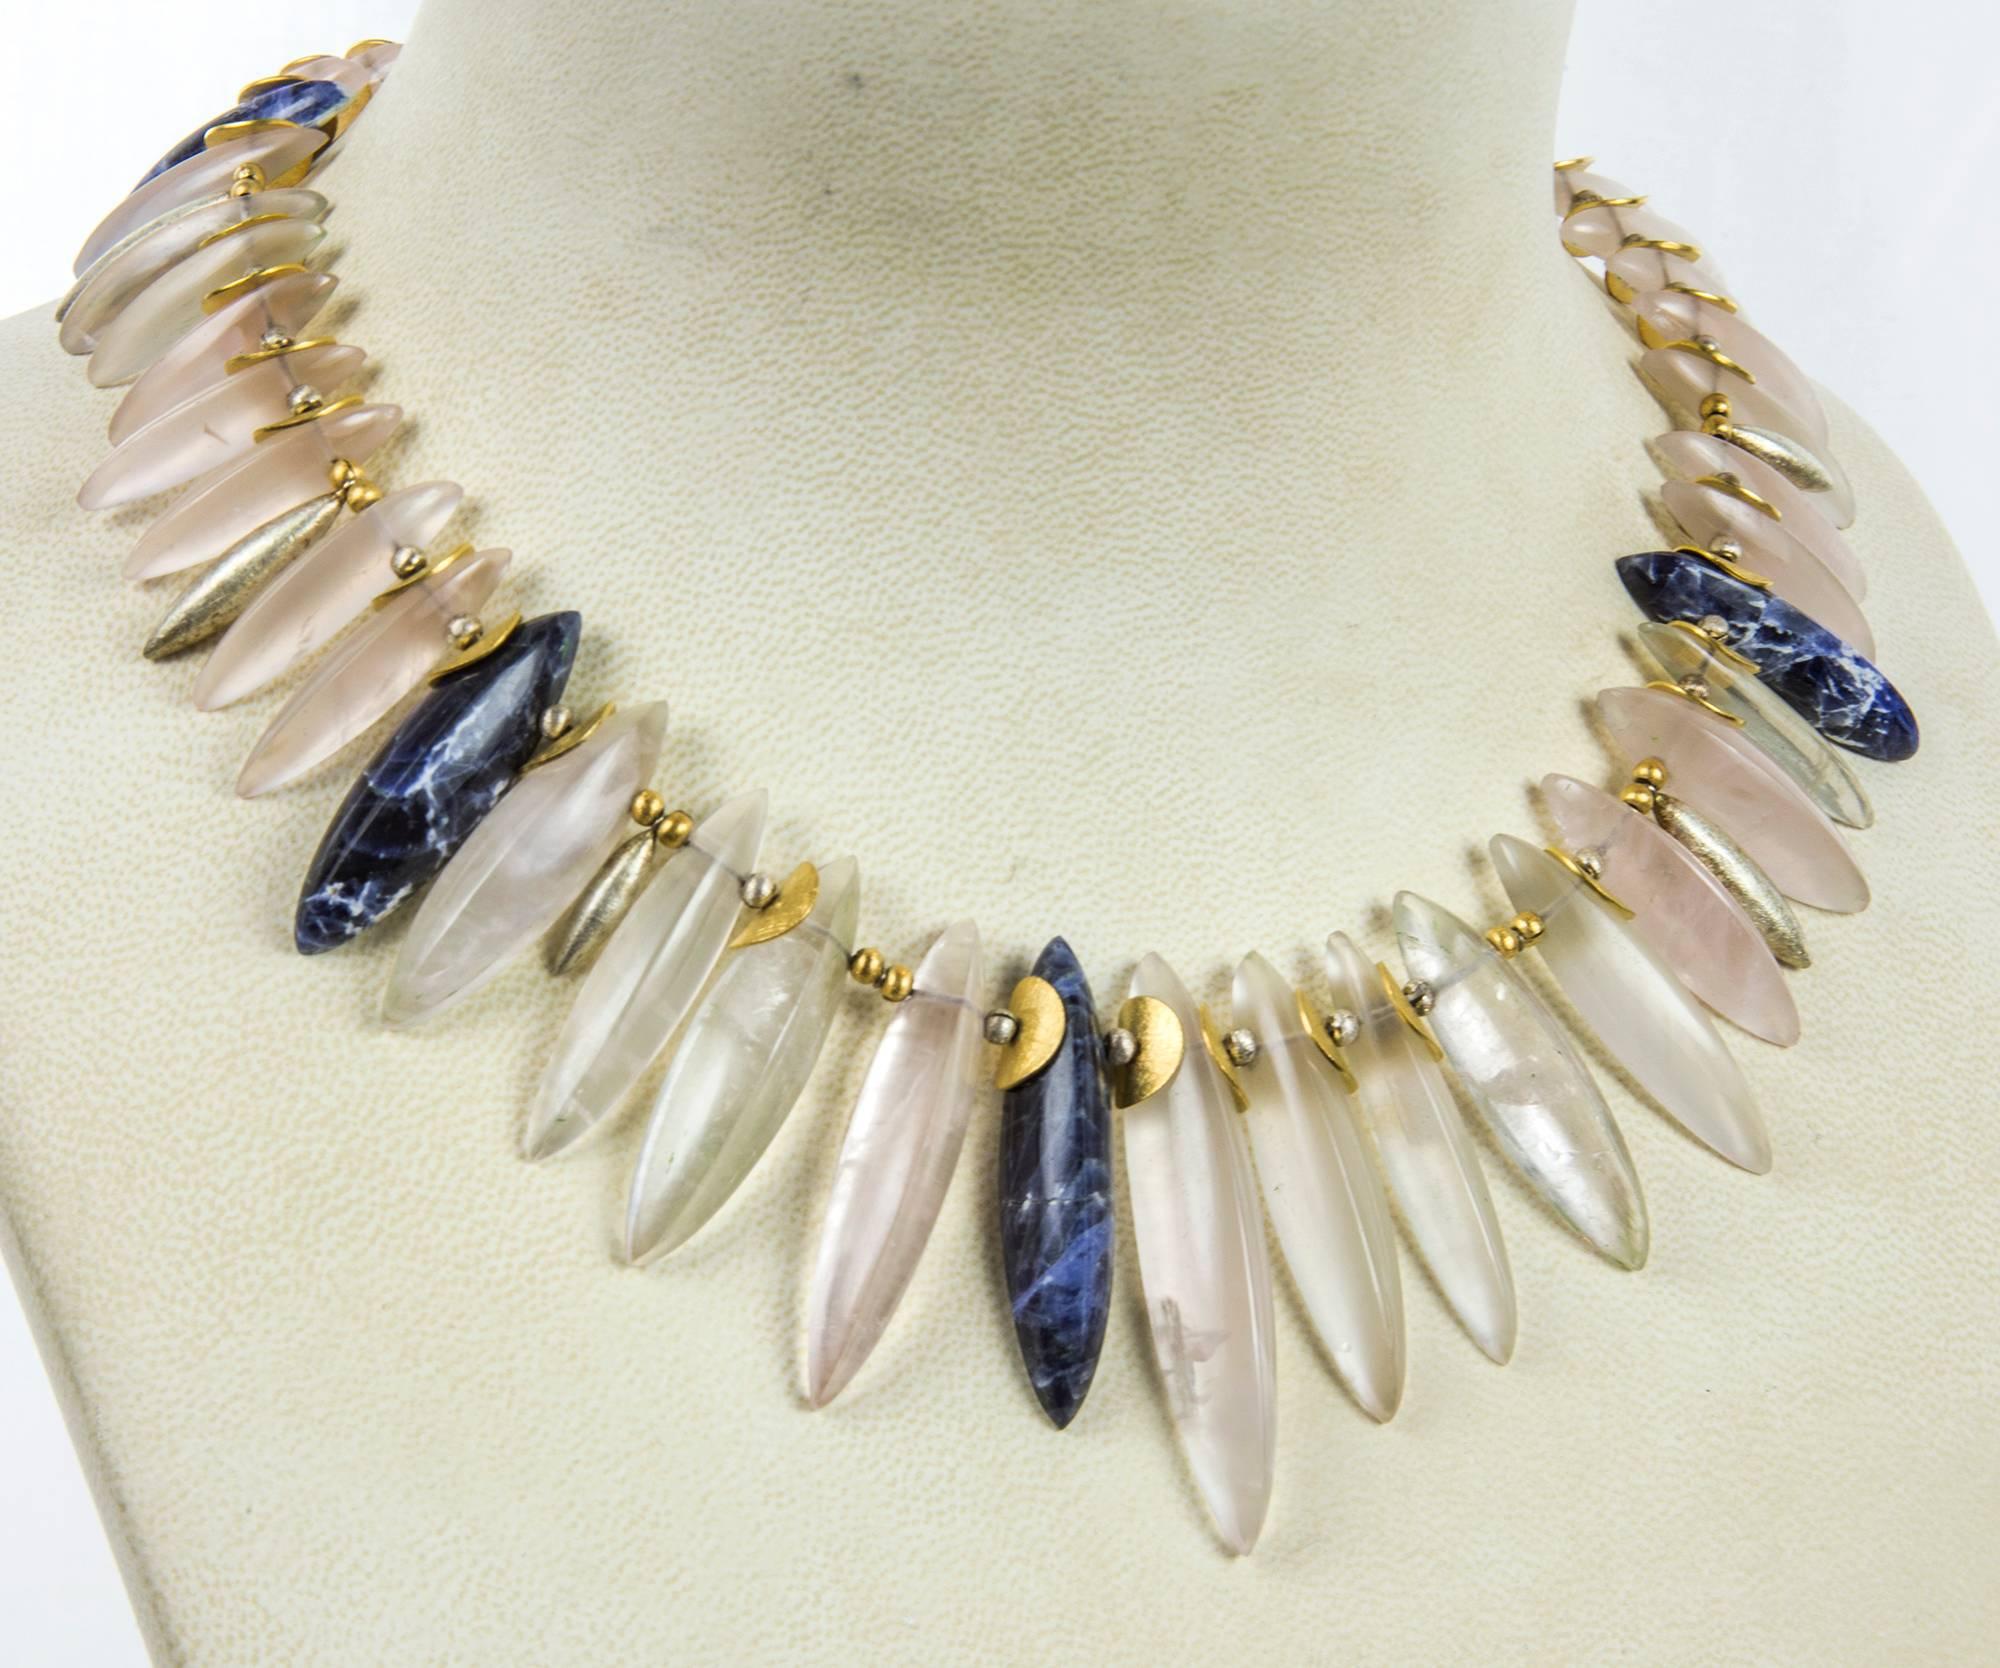 Awesome Crystal Quartz and Sodalite Spear Necklace inter-spaced with gilt sterling silver and sterling silver spacers, held by a gilt sterling silver clasp; approx., necklace length 17.5” An Exciting and Classic Fashion Statement! 
